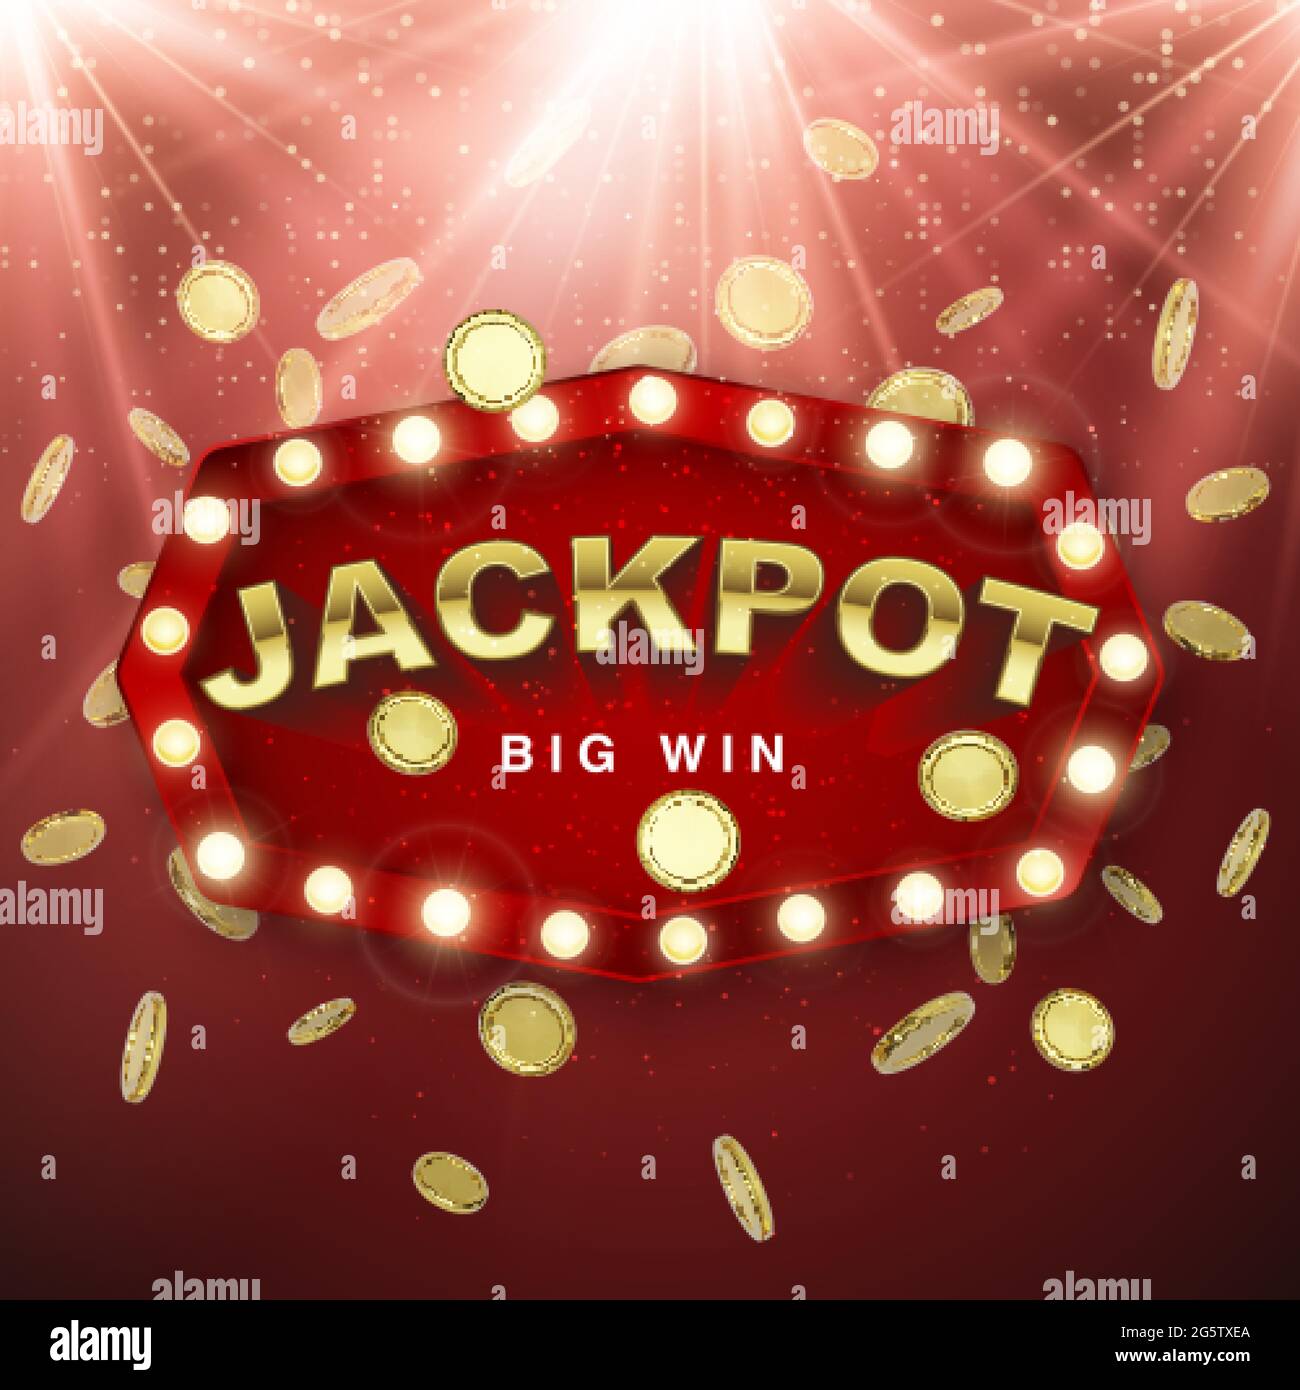 Jackpot casino winner. Big win banner. Retro signboard with falling gold coins on red background with light rays. Vector illustration Stock Vector